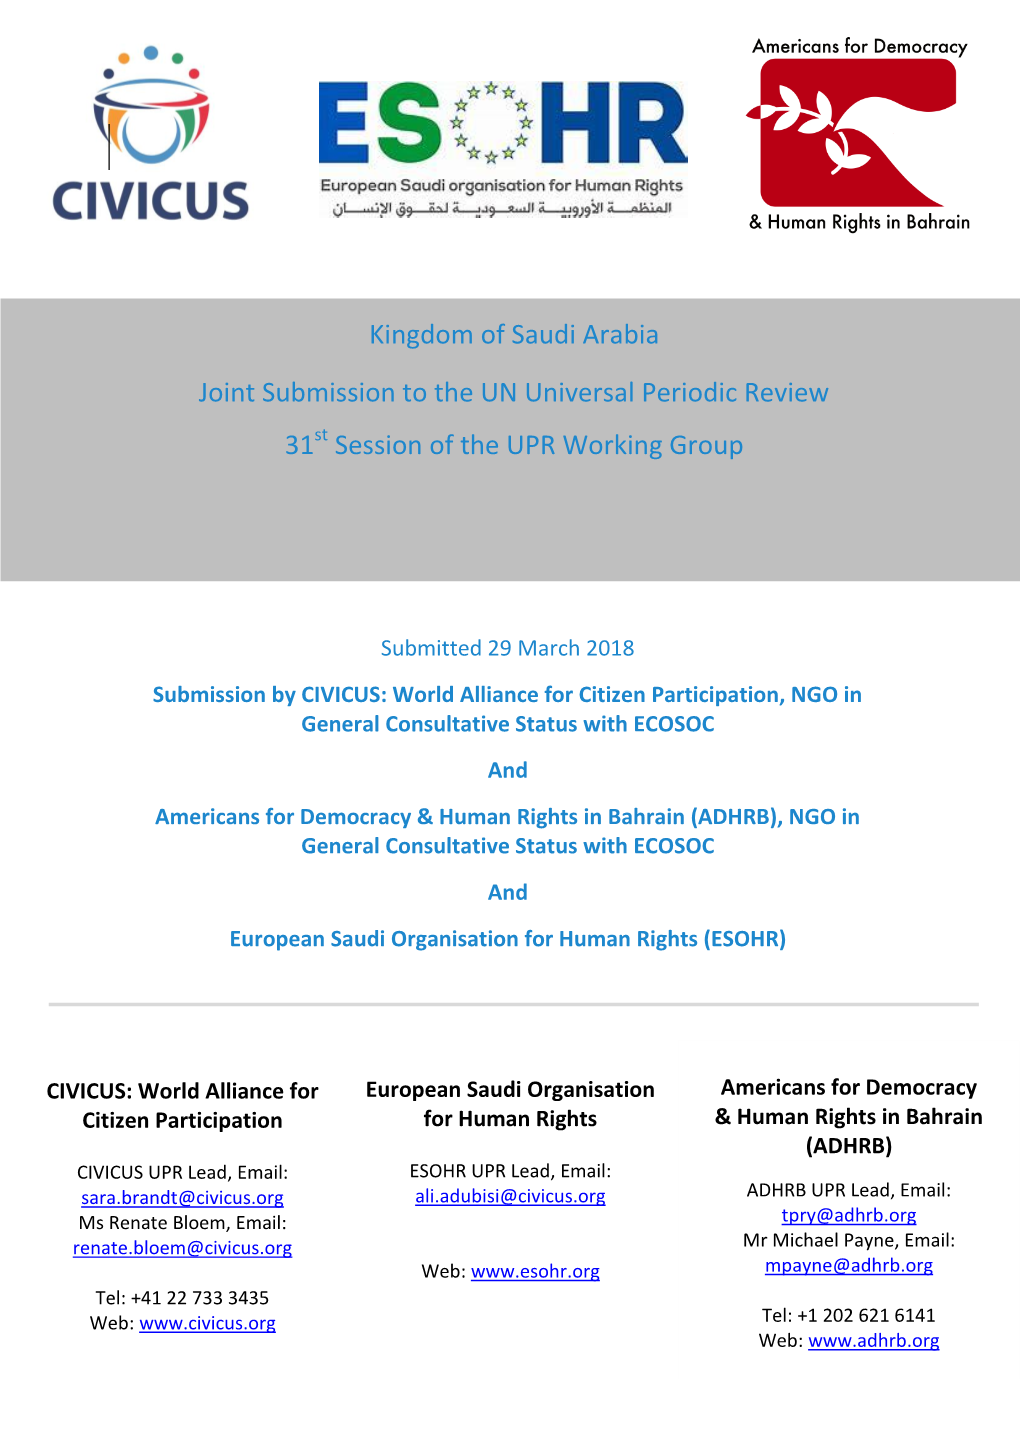 Kingdom of Saudi Arabia Joint Submission to the UN Universal Periodic Review 31 Session of the UPR Working Group